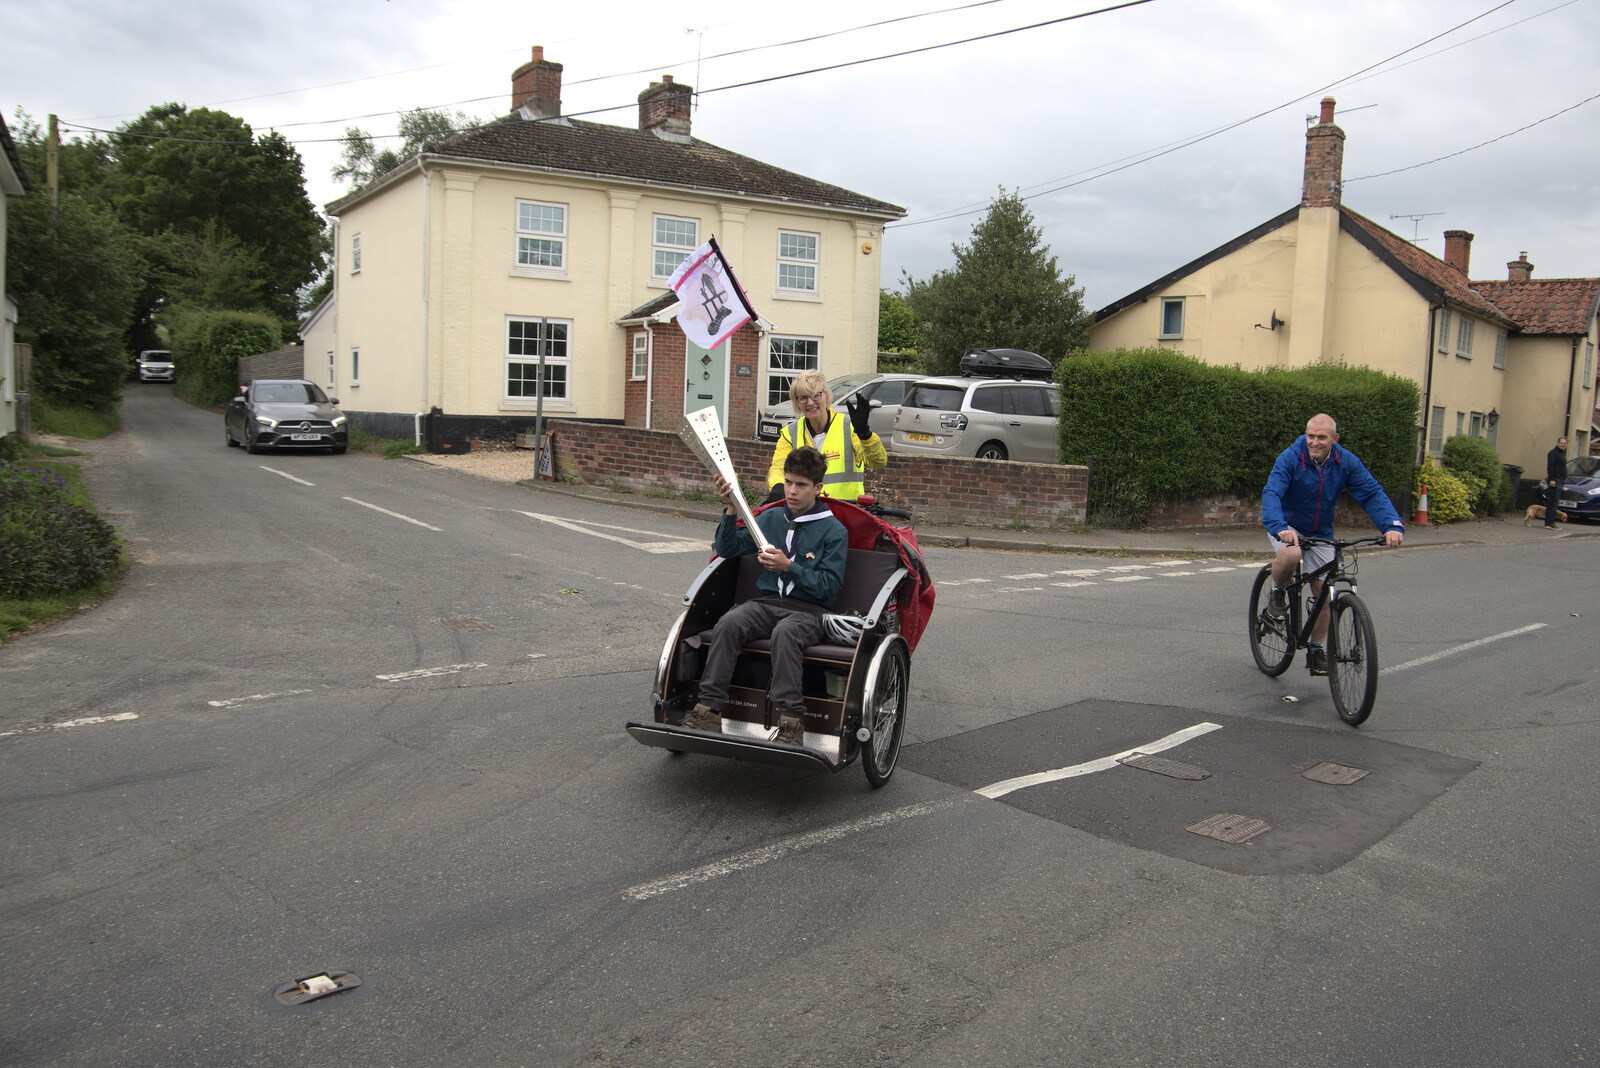 The rickshaw heads out onto the main Hoxne Road from The Jubilee Torch Run, Brome and Oakley, Suffolk - 25th May 2022